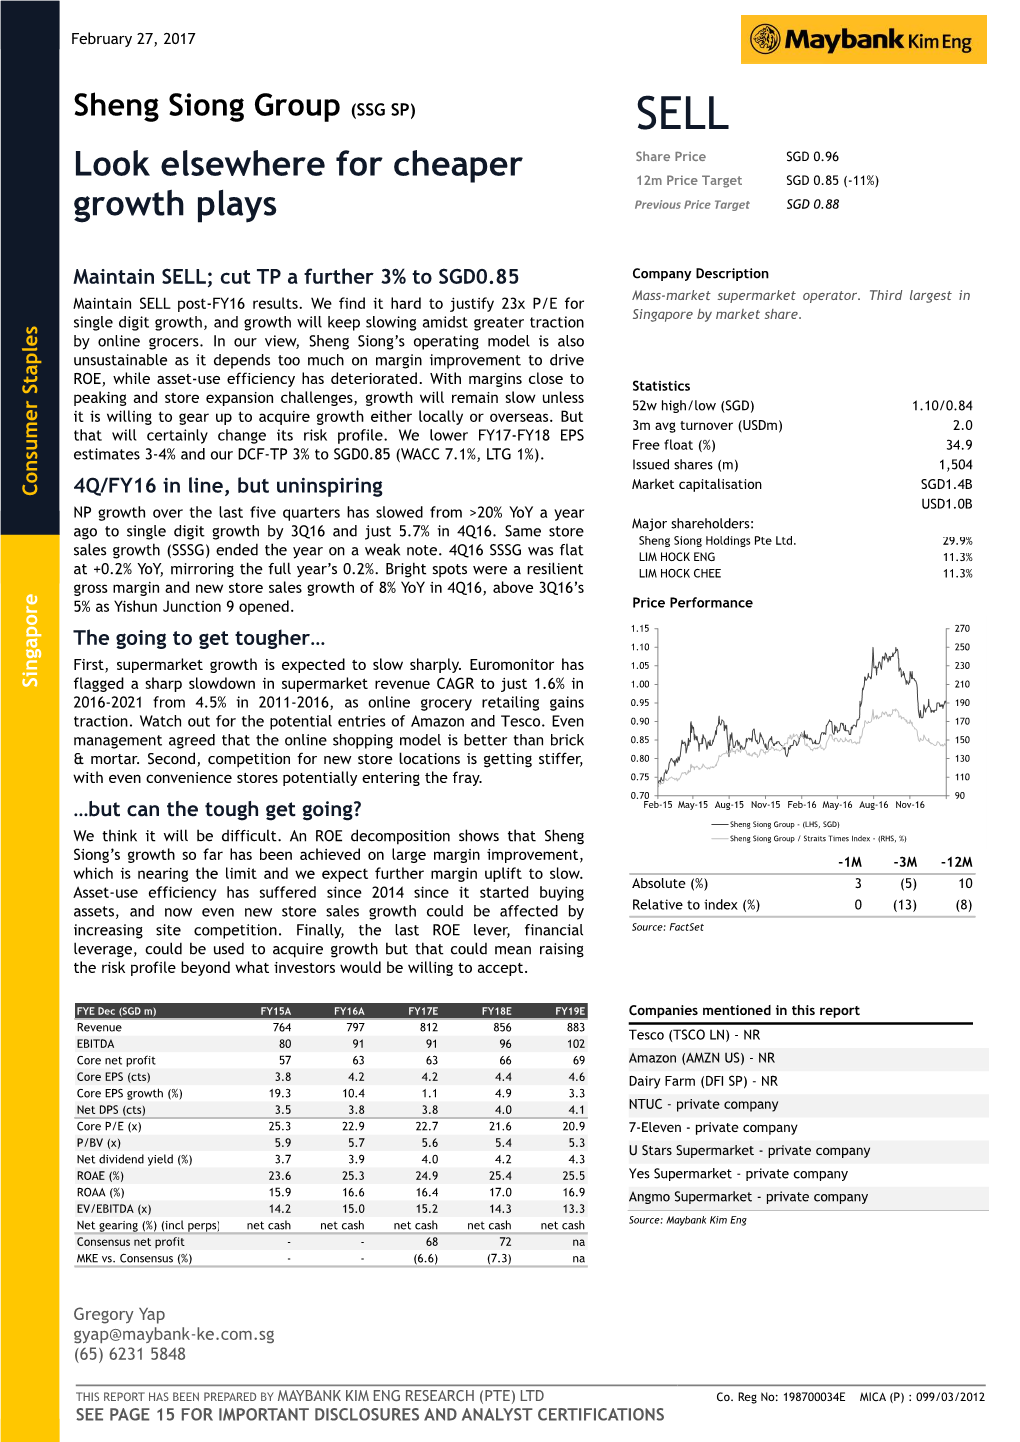 Sheng Siong Group (SSG SP) SELL Share Price SGD 0.96 Look Elsewhere for Cheaper 12M Price Target SGD 0.85 (-11%) Growth Plays Previous Price Target SGD 0.88